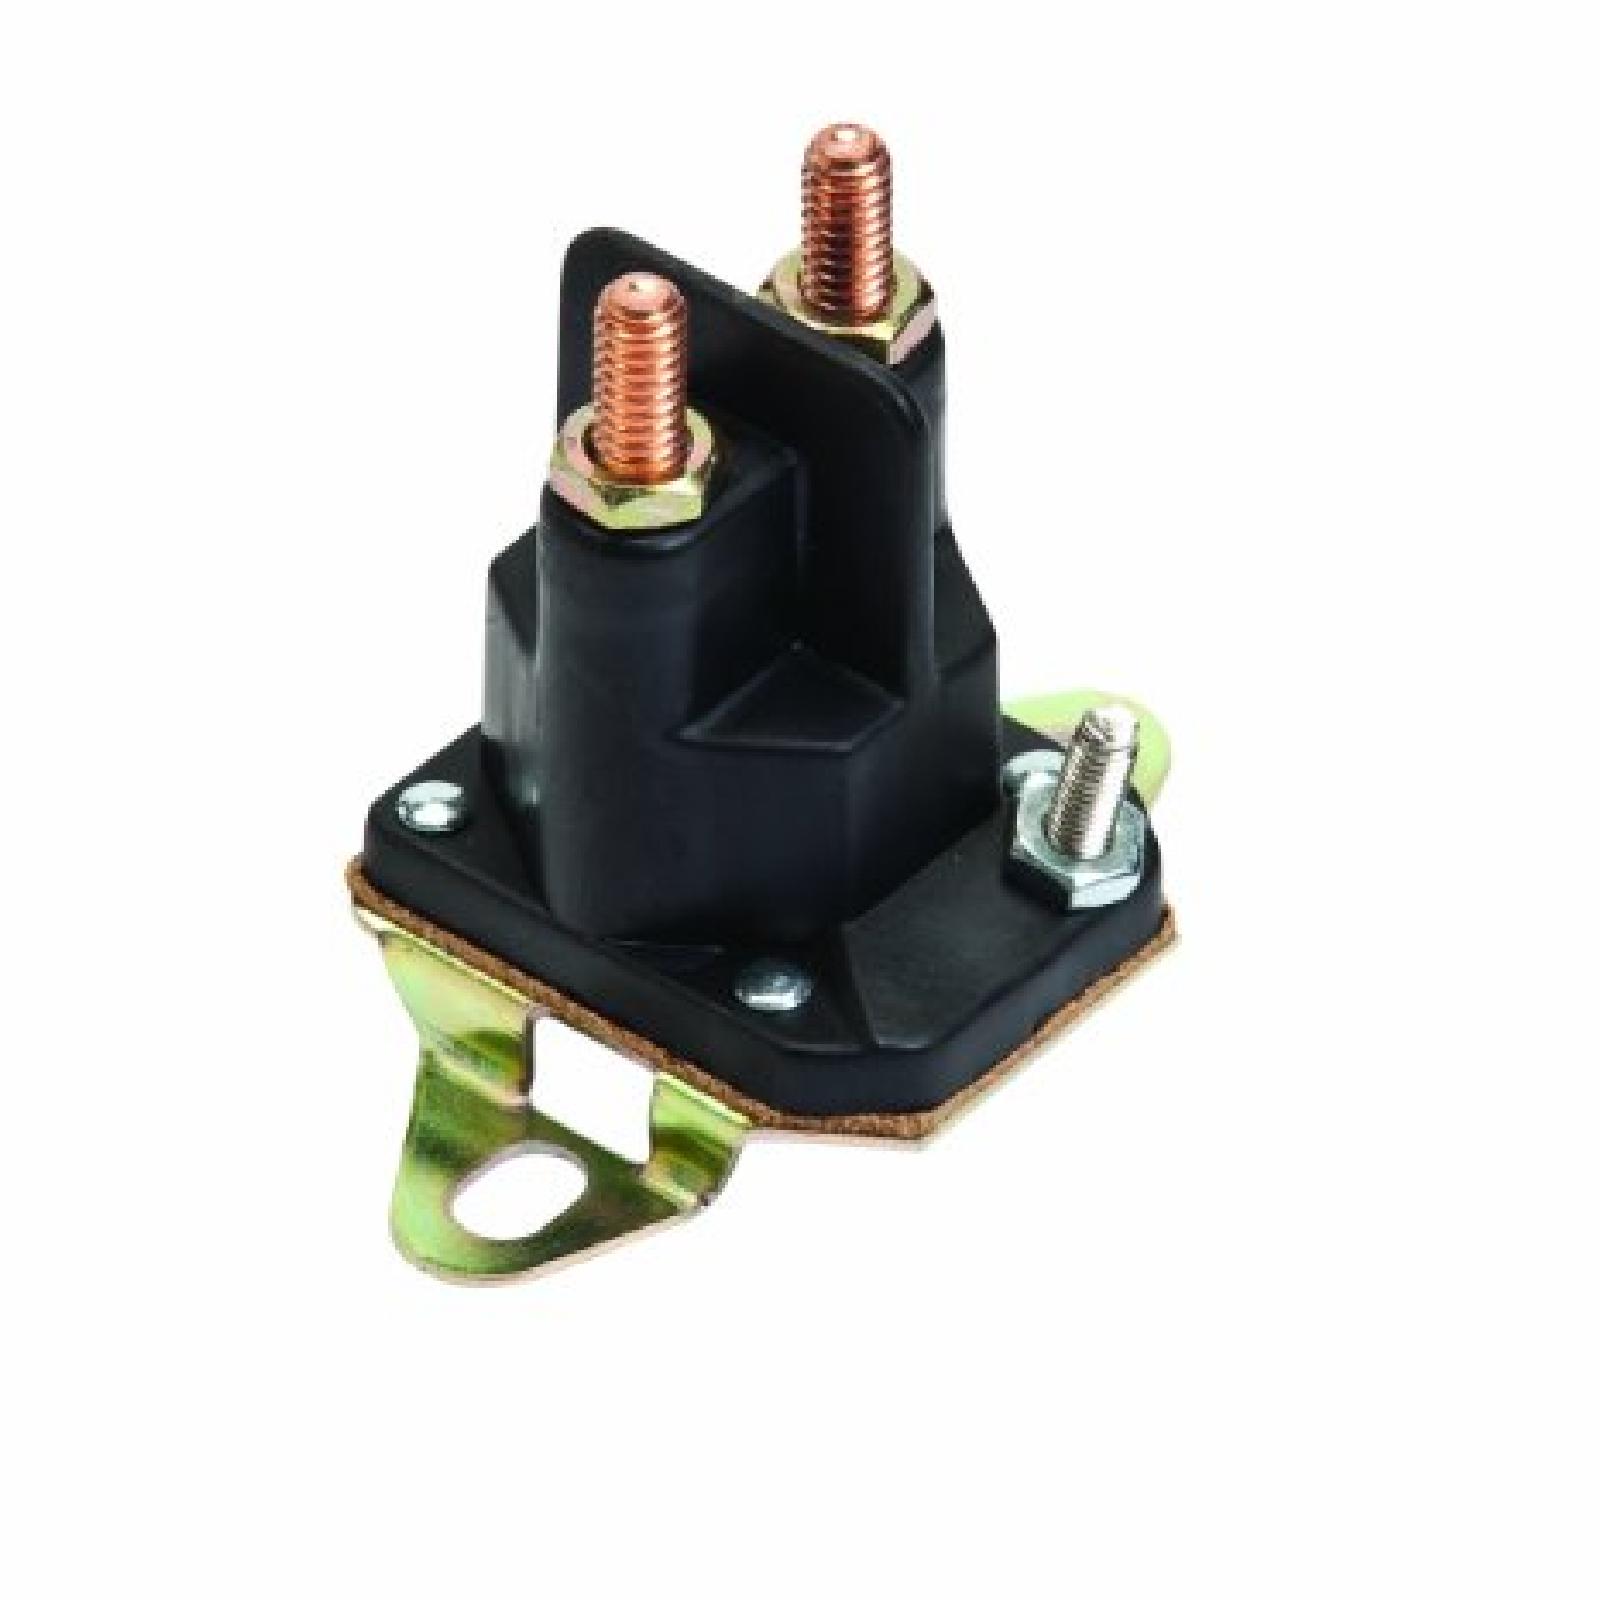 SOLENOID, MURRAY 3 POST 1 part# 33-331 by Oregon